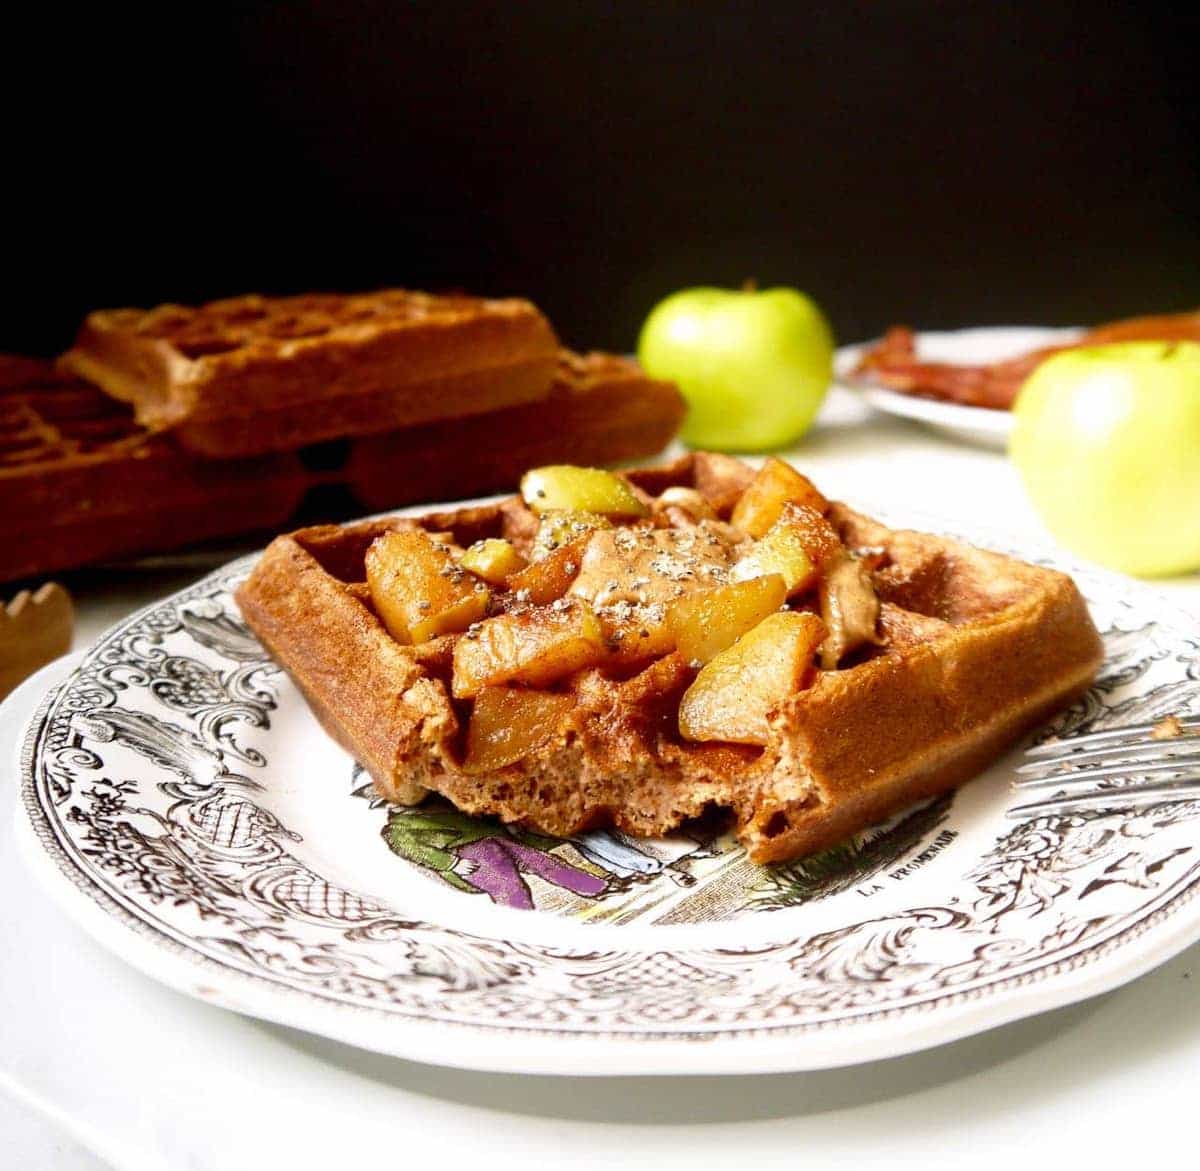 Gluten free apple cinnamon waffles on a plate with a bite taken out of it.